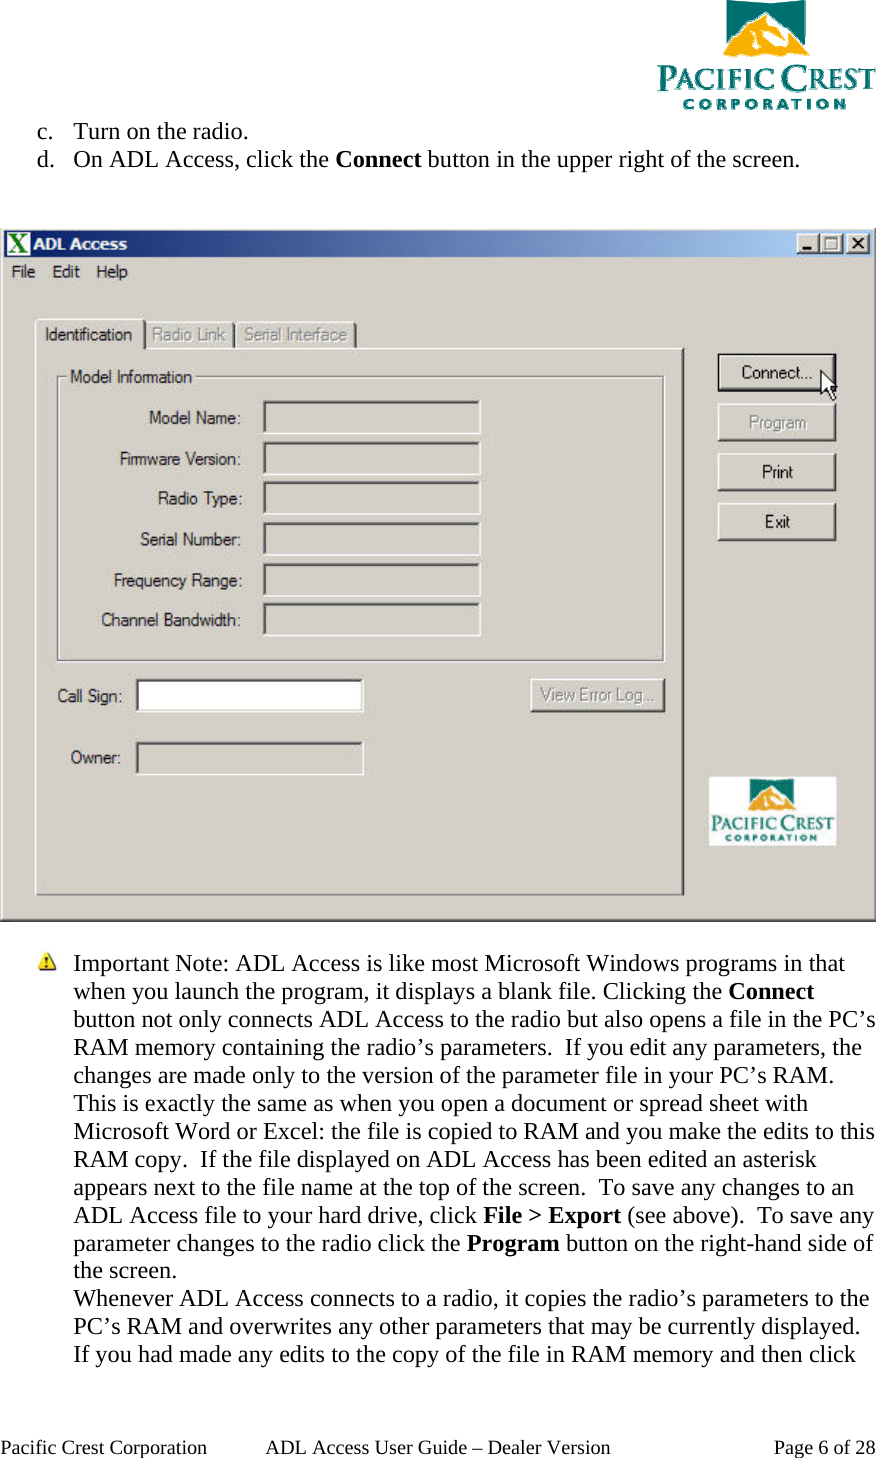  Pacific Crest Corporation  ADL Access User Guide – Dealer Version  Page 6 of 28 c. Turn on the radio. d. On ADL Access, click the Connect button in the upper right of the screen.      Important Note: ADL Access is like most Microsoft Windows programs in that when you launch the program, it displays a blank file. Clicking the Connect button not only connects ADL Access to the radio but also opens a file in the PC’s RAM memory containing the radio’s parameters.  If you edit any parameters, the changes are made only to the version of the parameter file in your PC’s RAM. This is exactly the same as when you open a document or spread sheet with Microsoft Word or Excel: the file is copied to RAM and you make the edits to this RAM copy.  If the file displayed on ADL Access has been edited an asterisk appears next to the file name at the top of the screen.  To save any changes to an ADL Access file to your hard drive, click File &gt; Export (see above).  To save any parameter changes to the radio click the Program button on the right-hand side of the screen. Whenever ADL Access connects to a radio, it copies the radio’s parameters to the PC’s RAM and overwrites any other parameters that may be currently displayed. If you had made any edits to the copy of the file in RAM memory and then click 